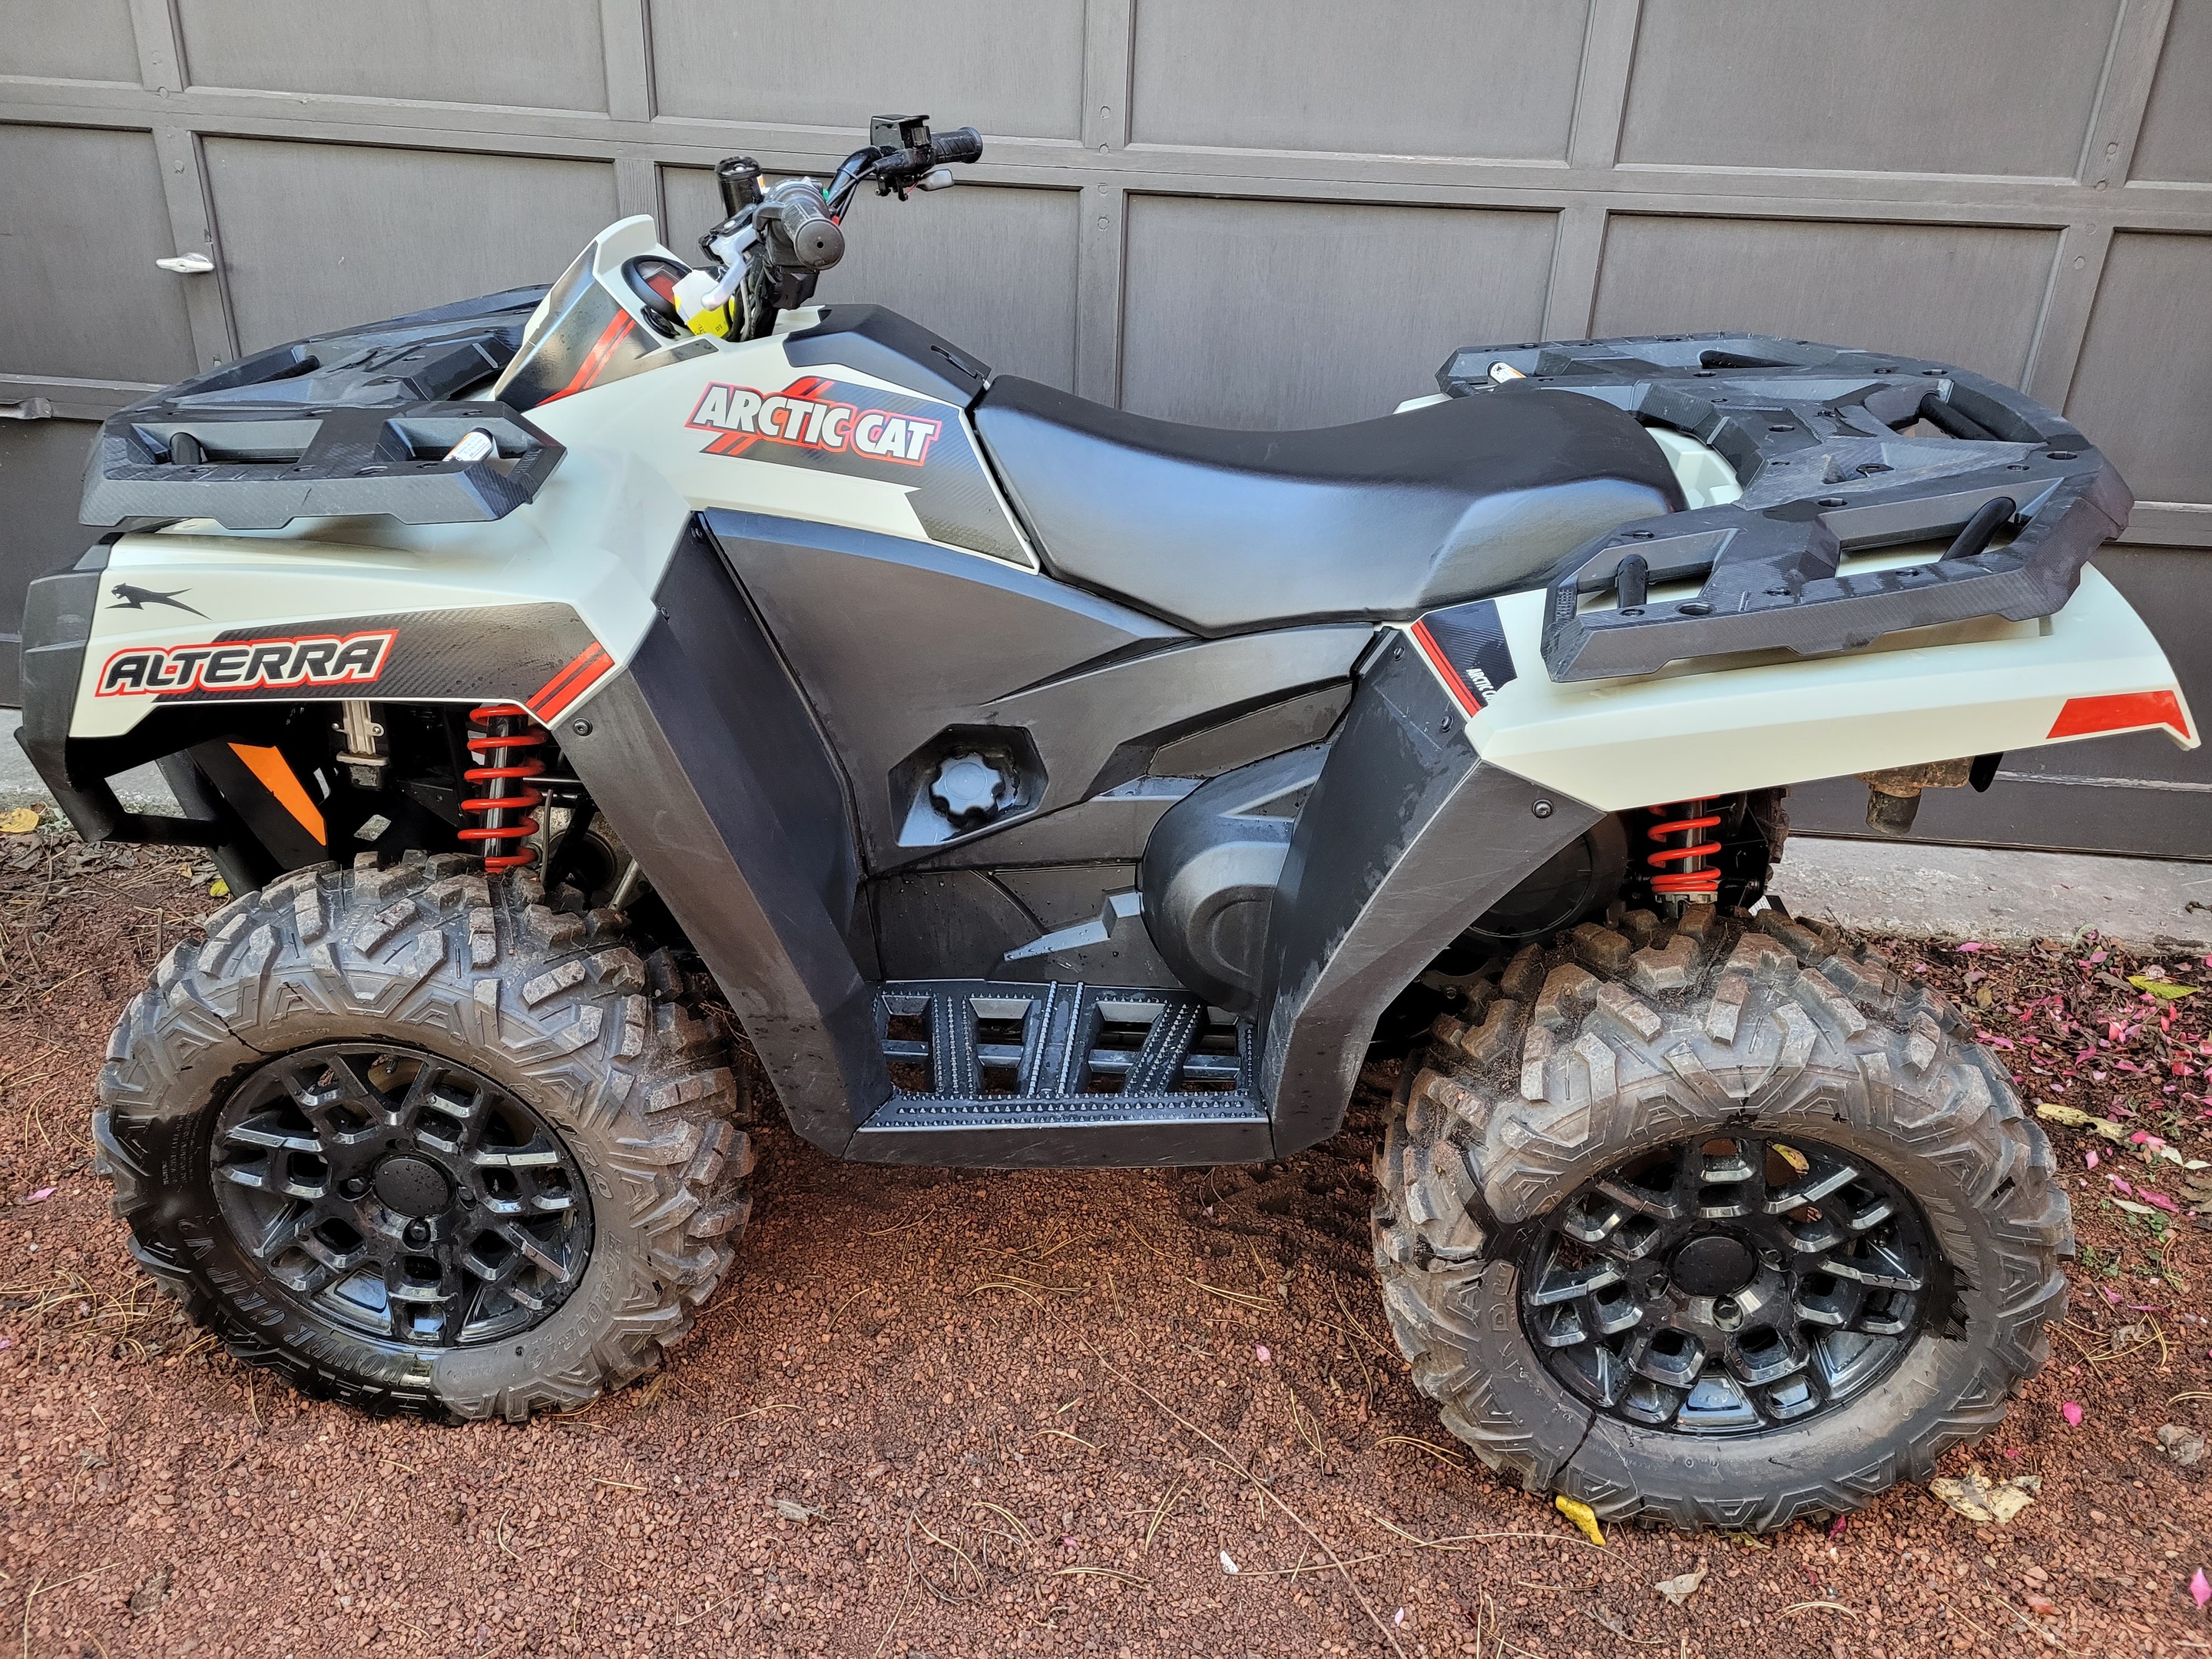 2022 Arctic Cat Alterra 600 LTD 1-Owner, Financing Available, Trade-ins Welcome!